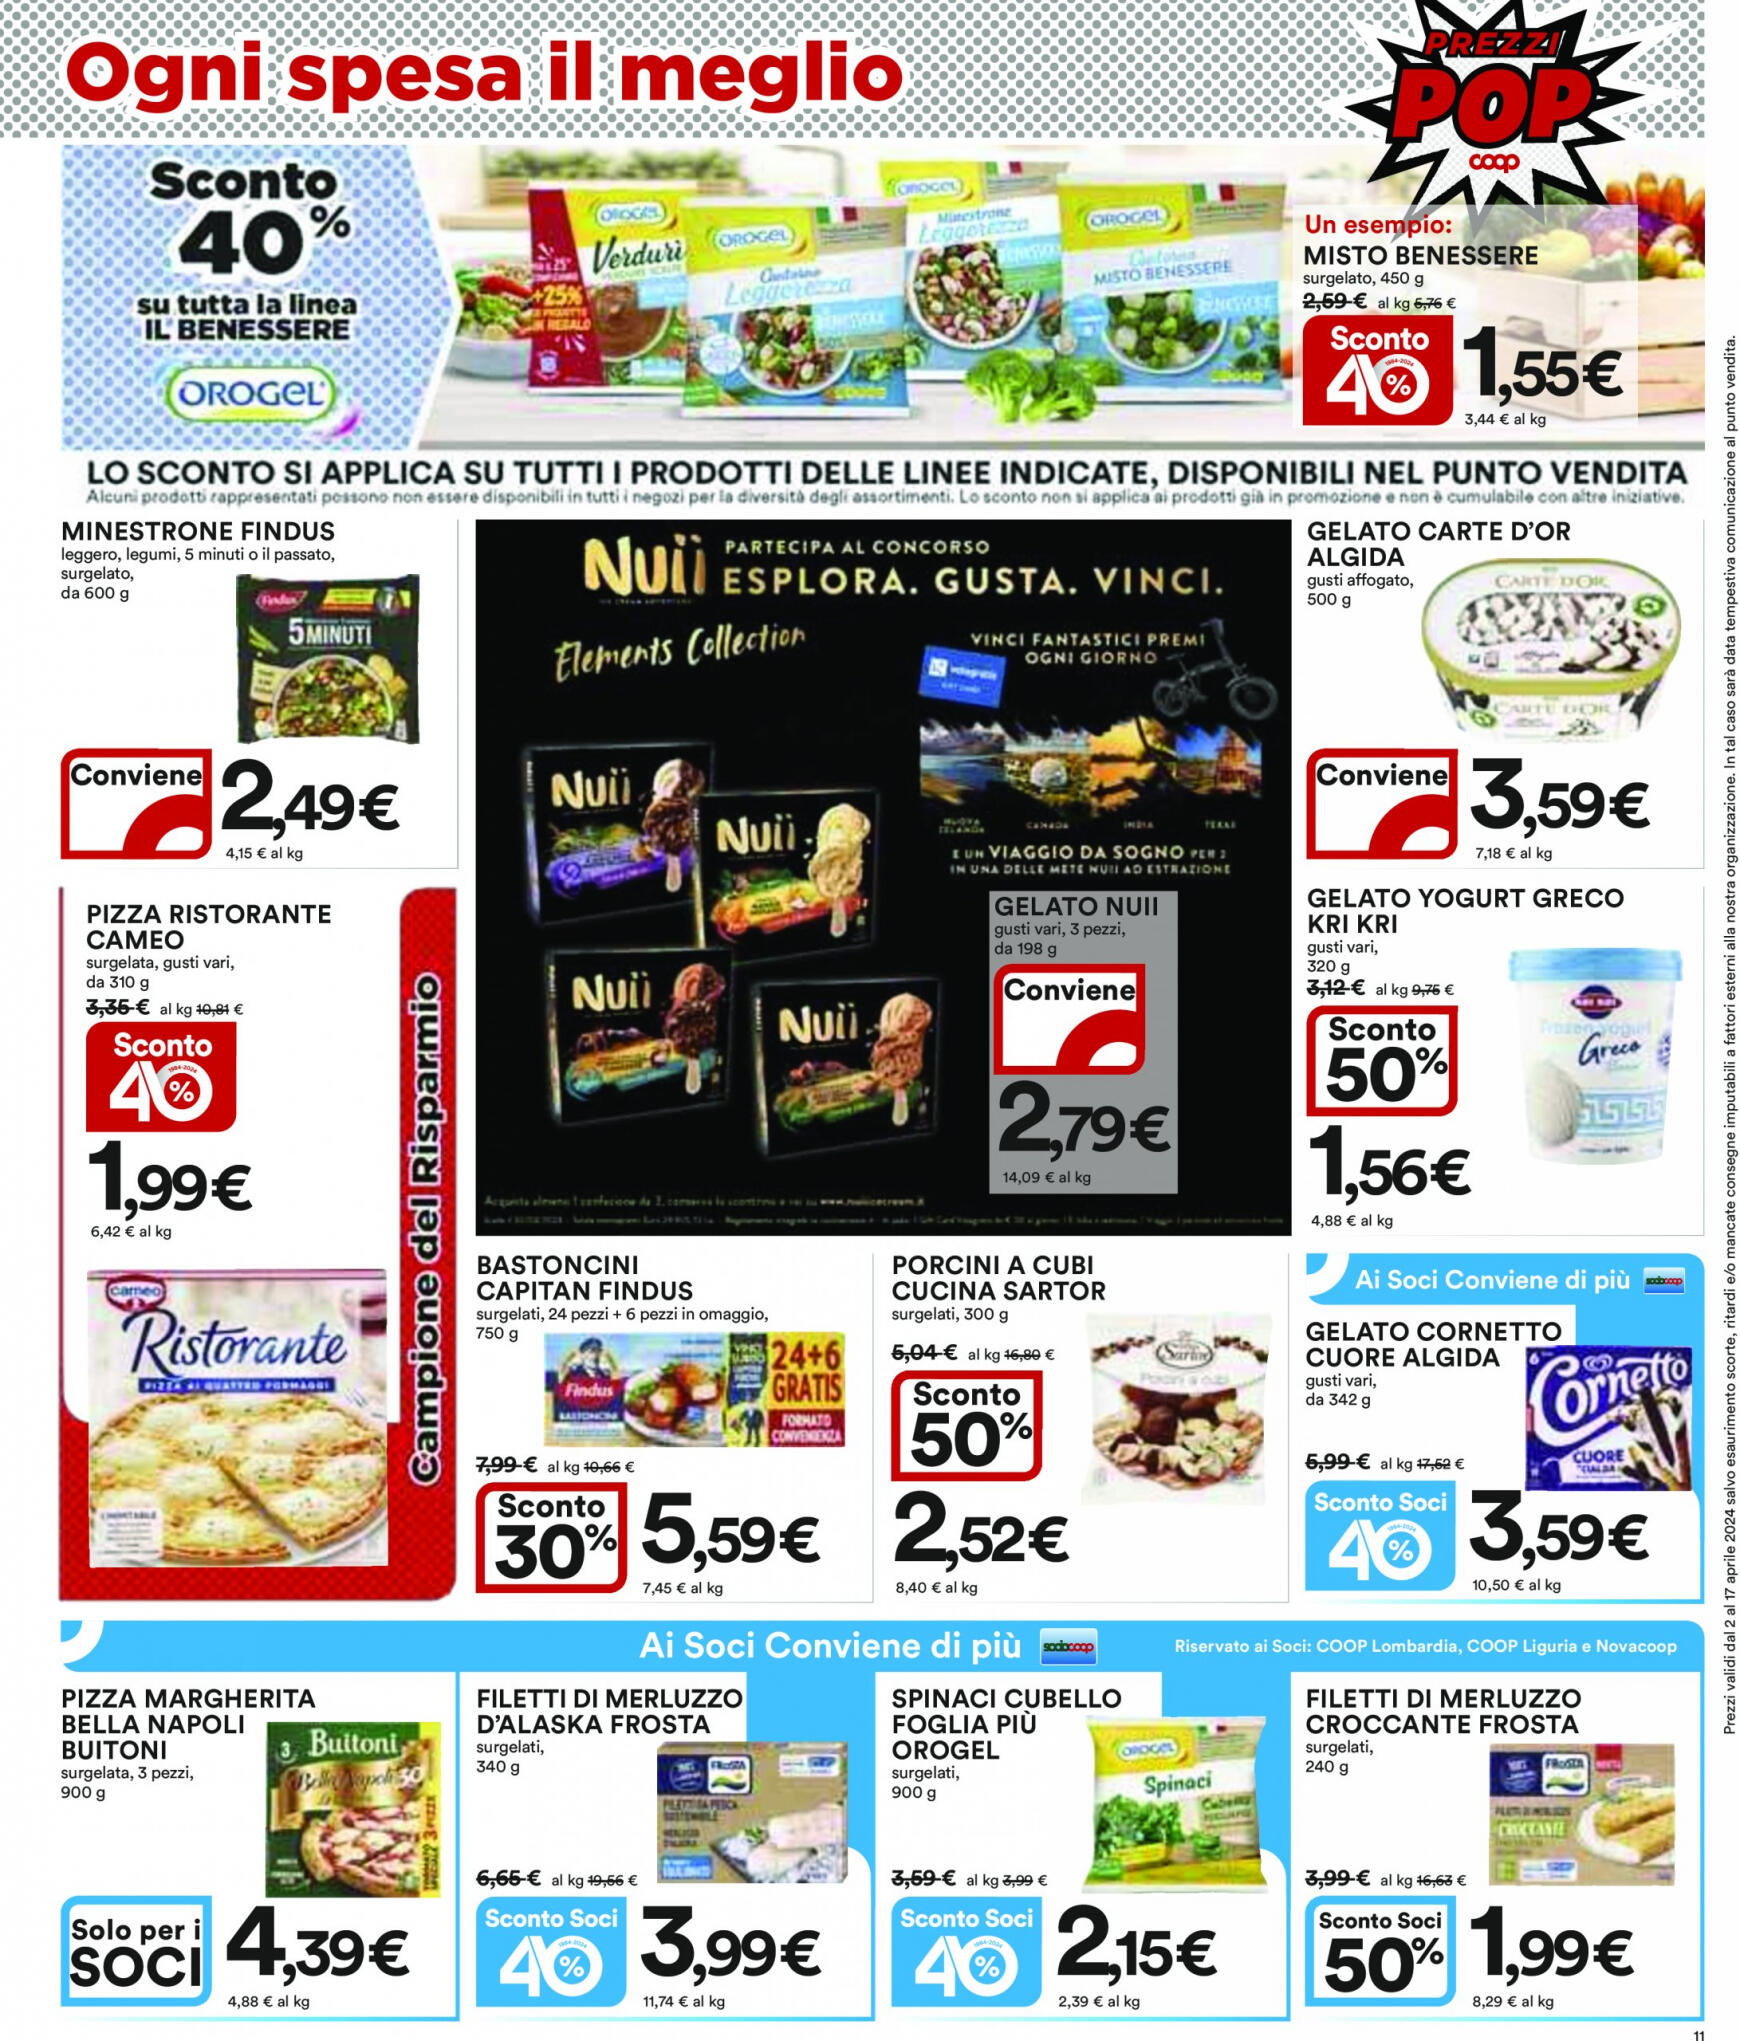 coop - Nuovo volantino Coop 02.04. - 17.04. - page: 11